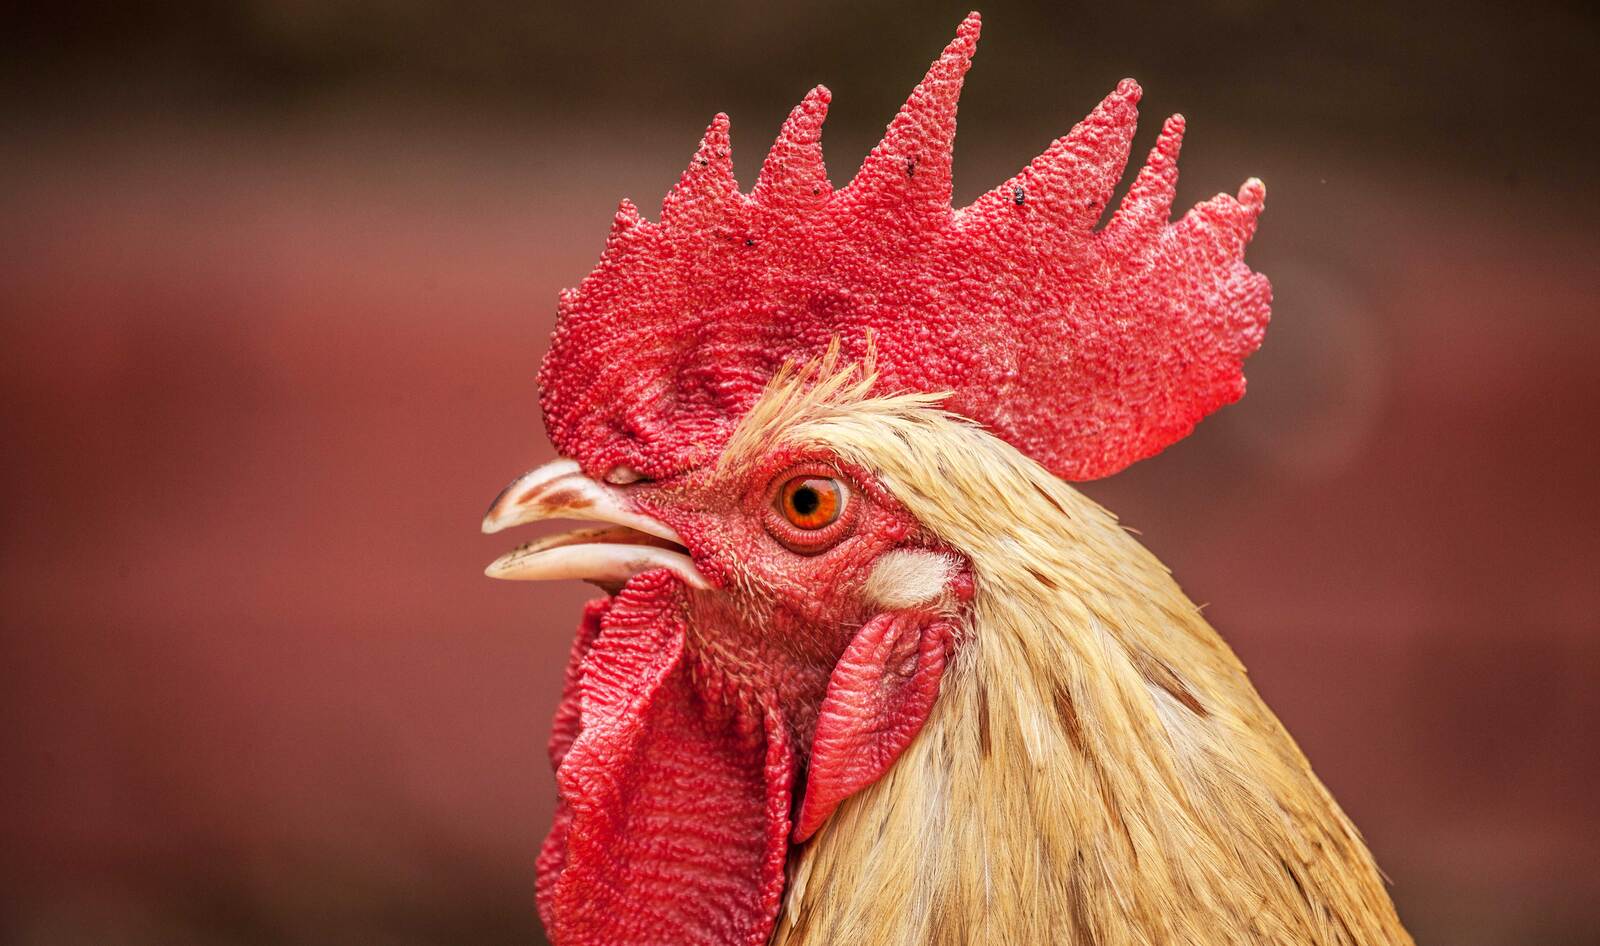 Sanctuary Sues Wisconsin City to End Cruel “Pioneer Day Chicken Toss”